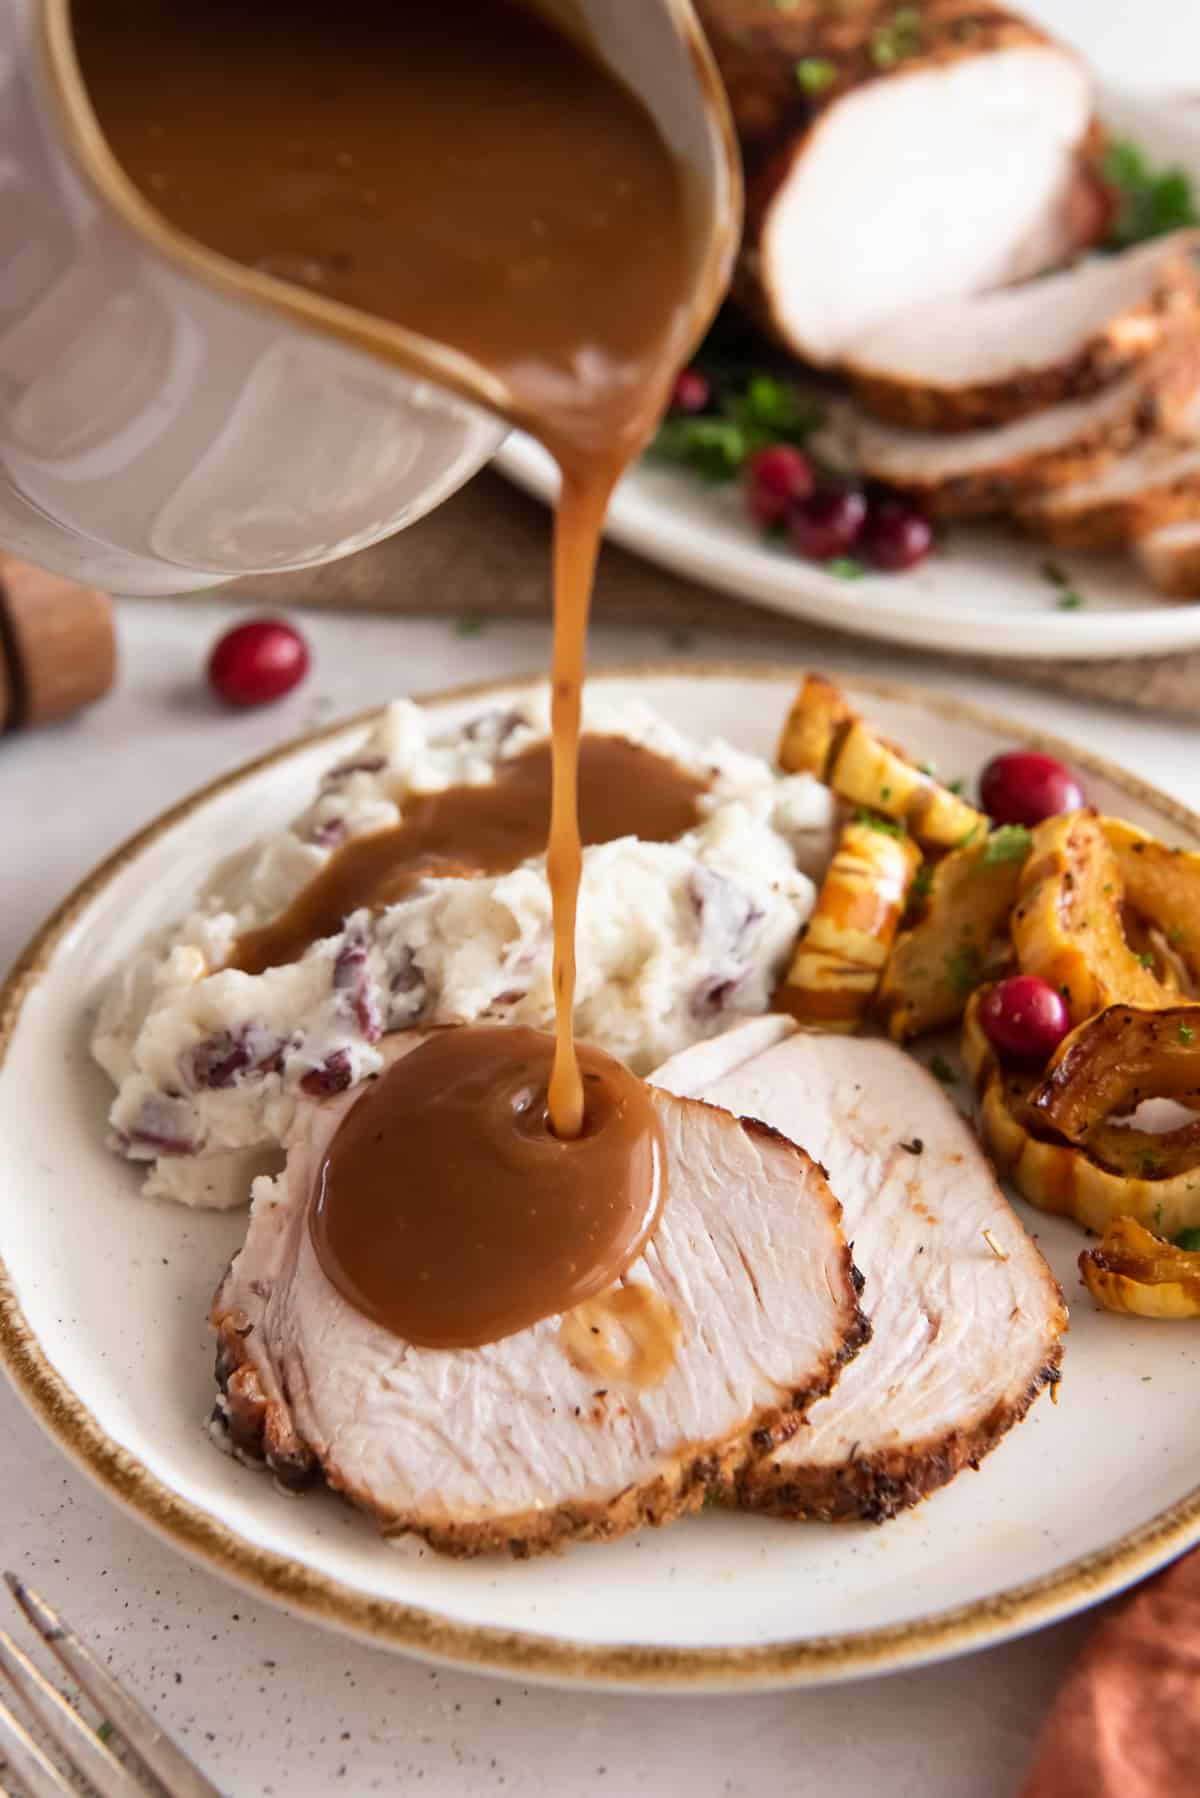 Gravy pouring from a gravy boat on to sliced turkey on a plate.